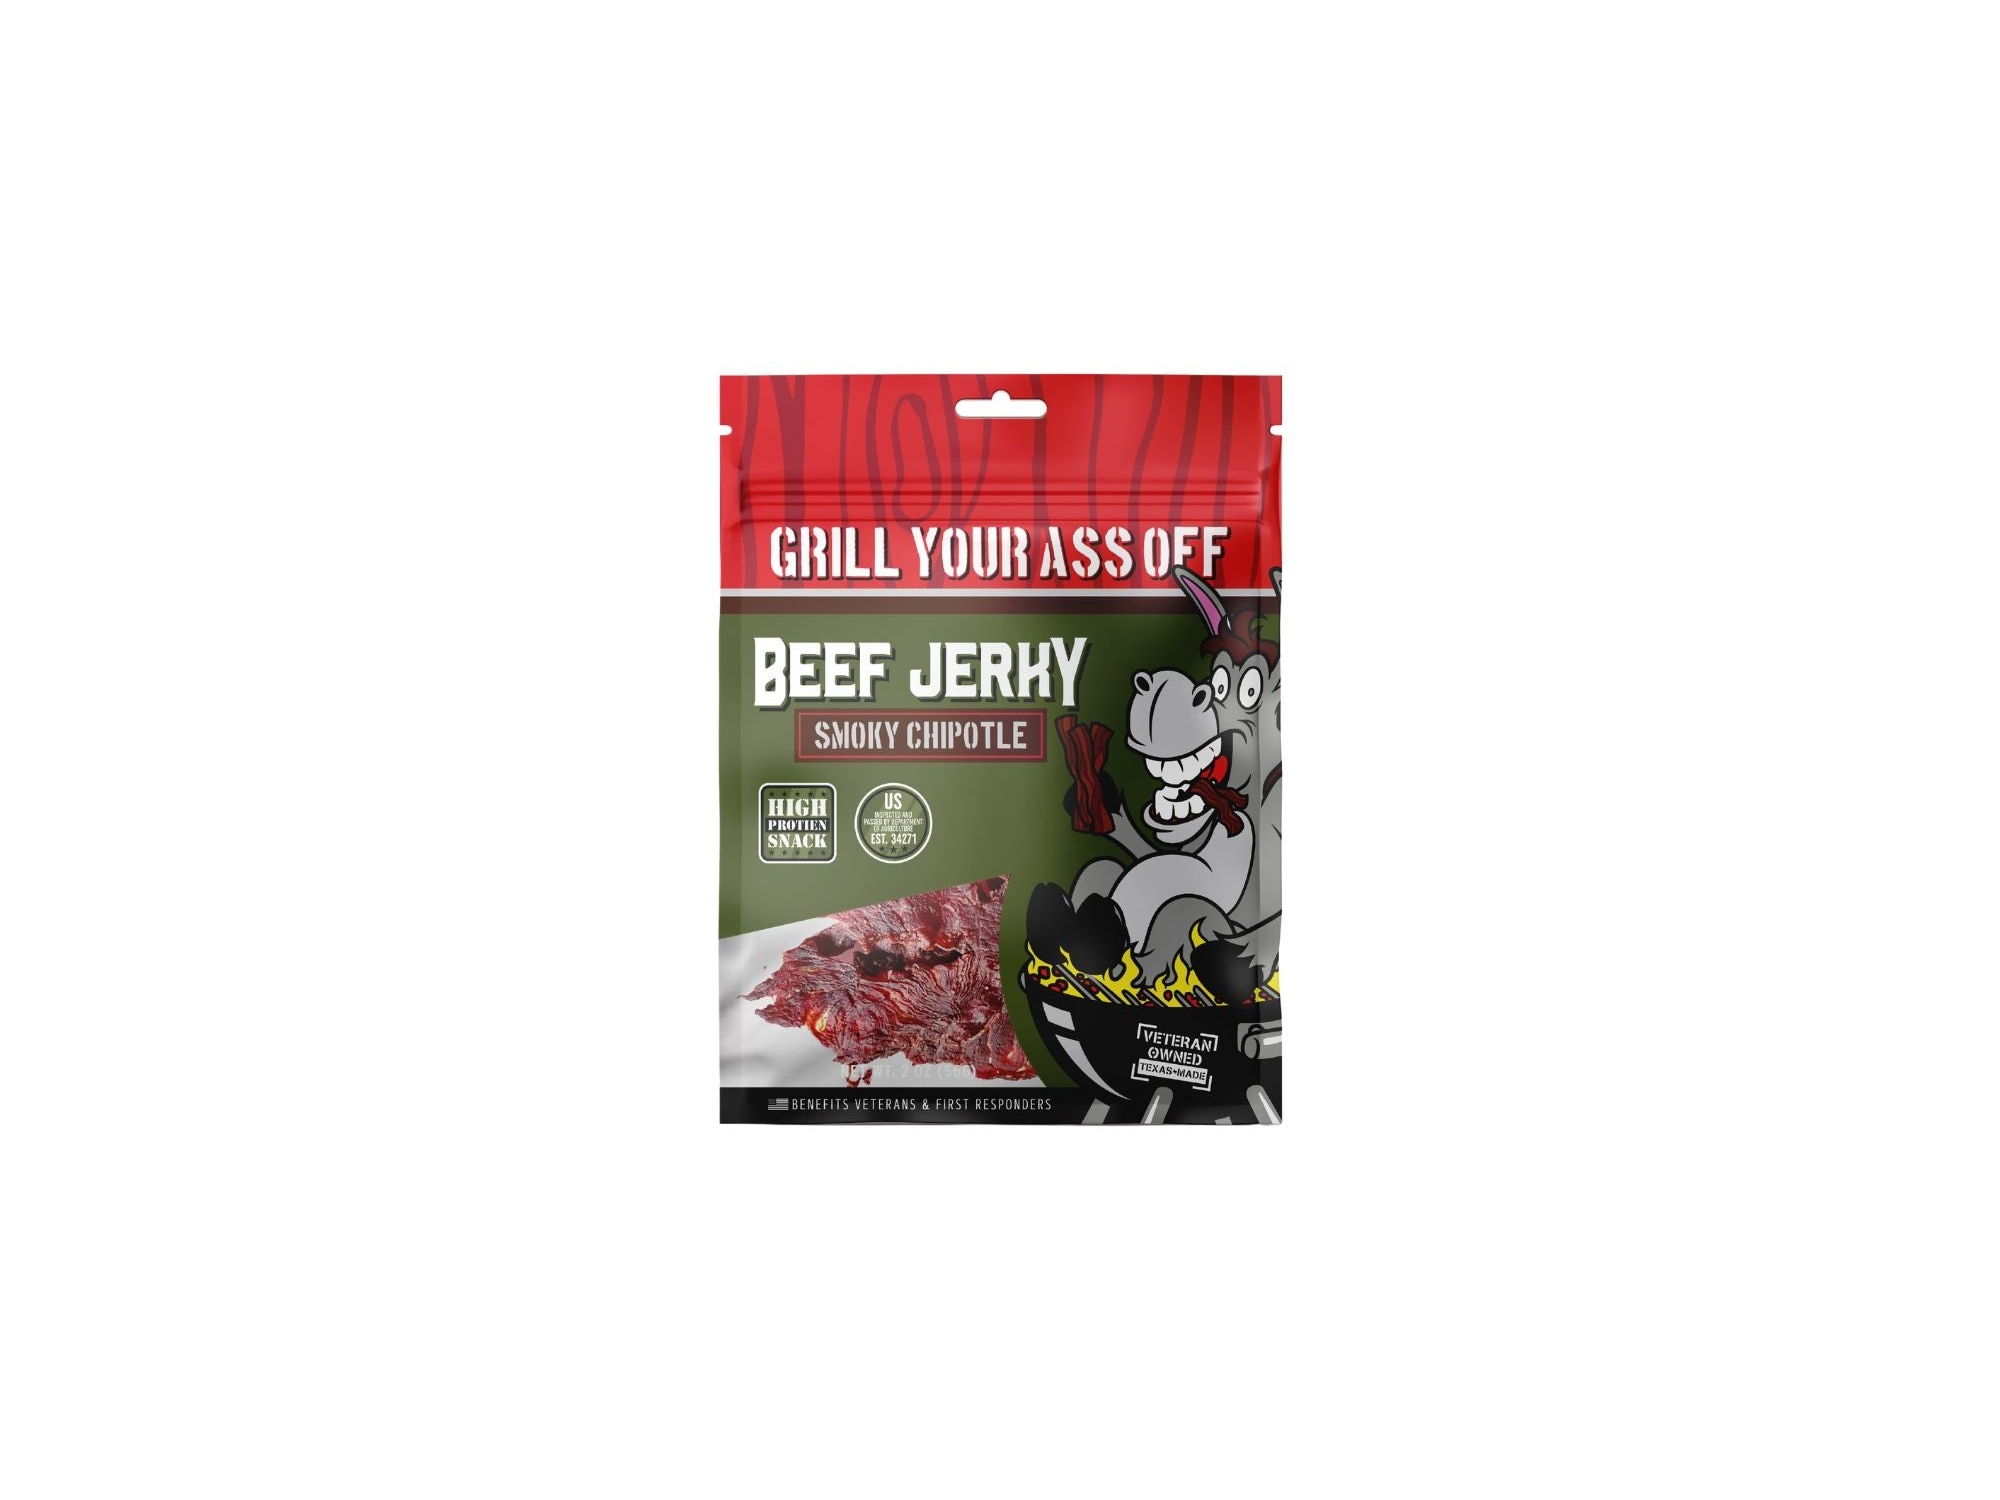 Grill Your Ass Off Smoky Chipotle Beef Jerky